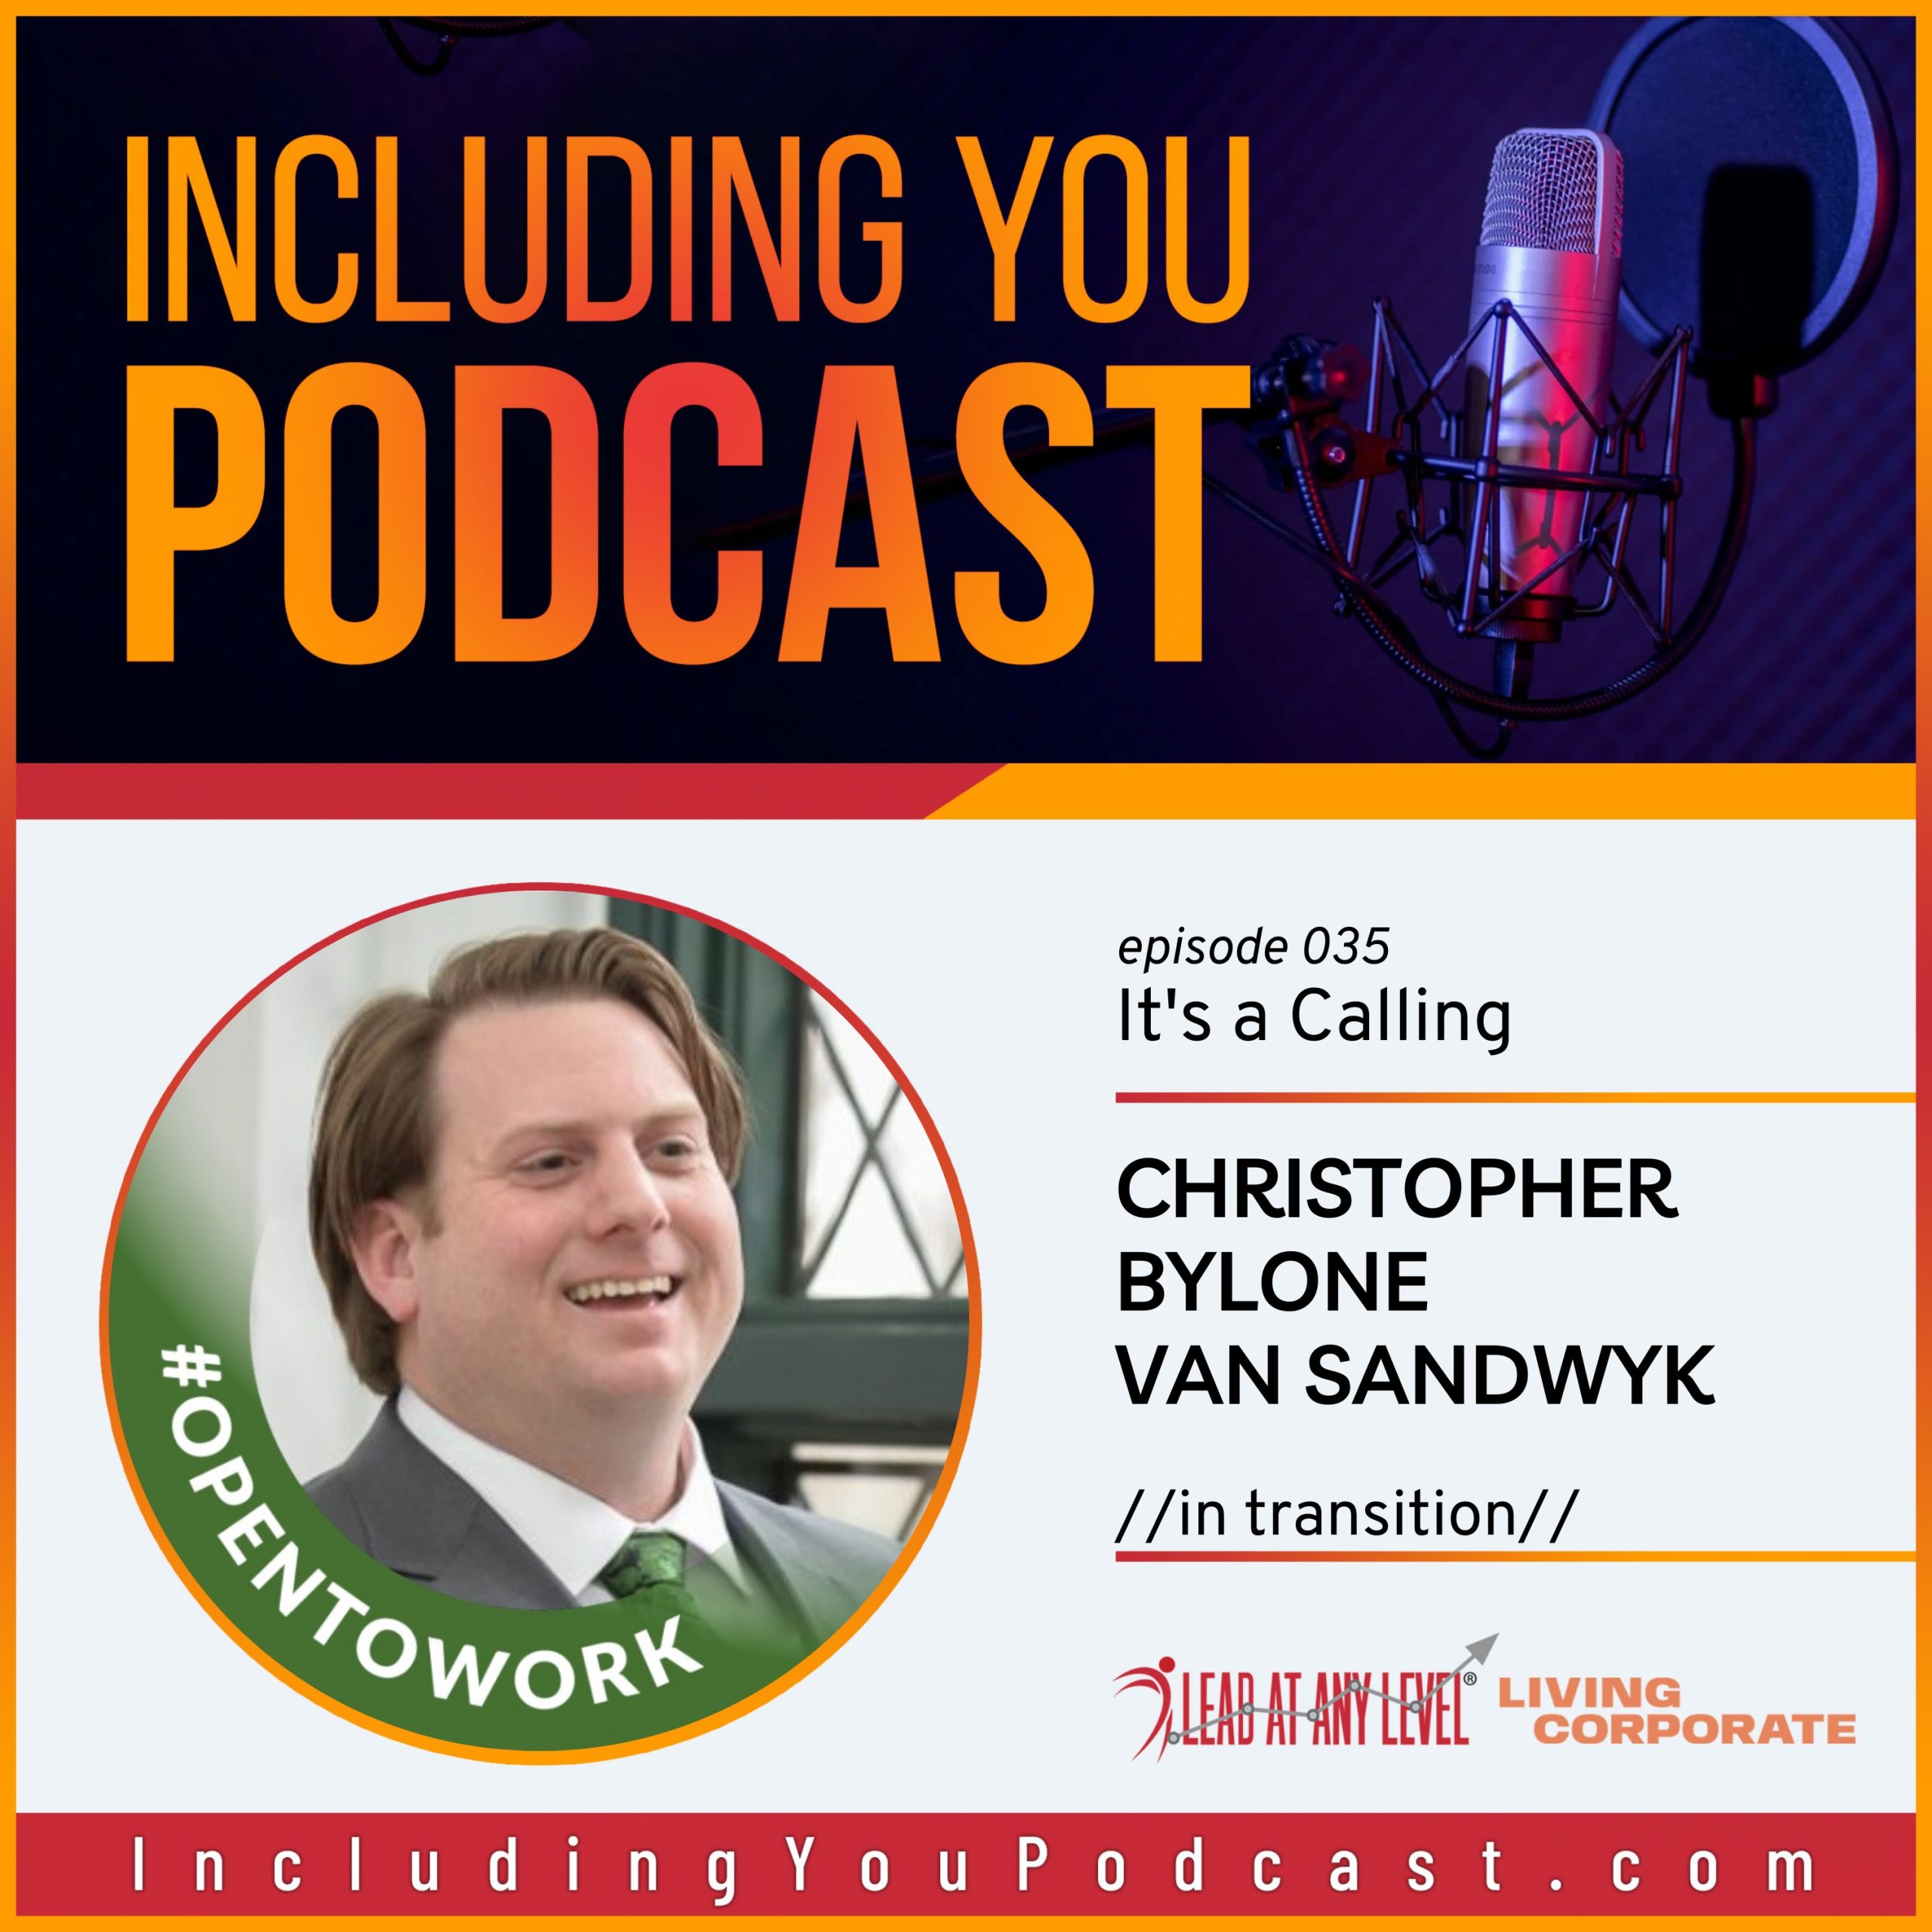 e035. It’s a Calling with Christopher Bylone van Sandwyk